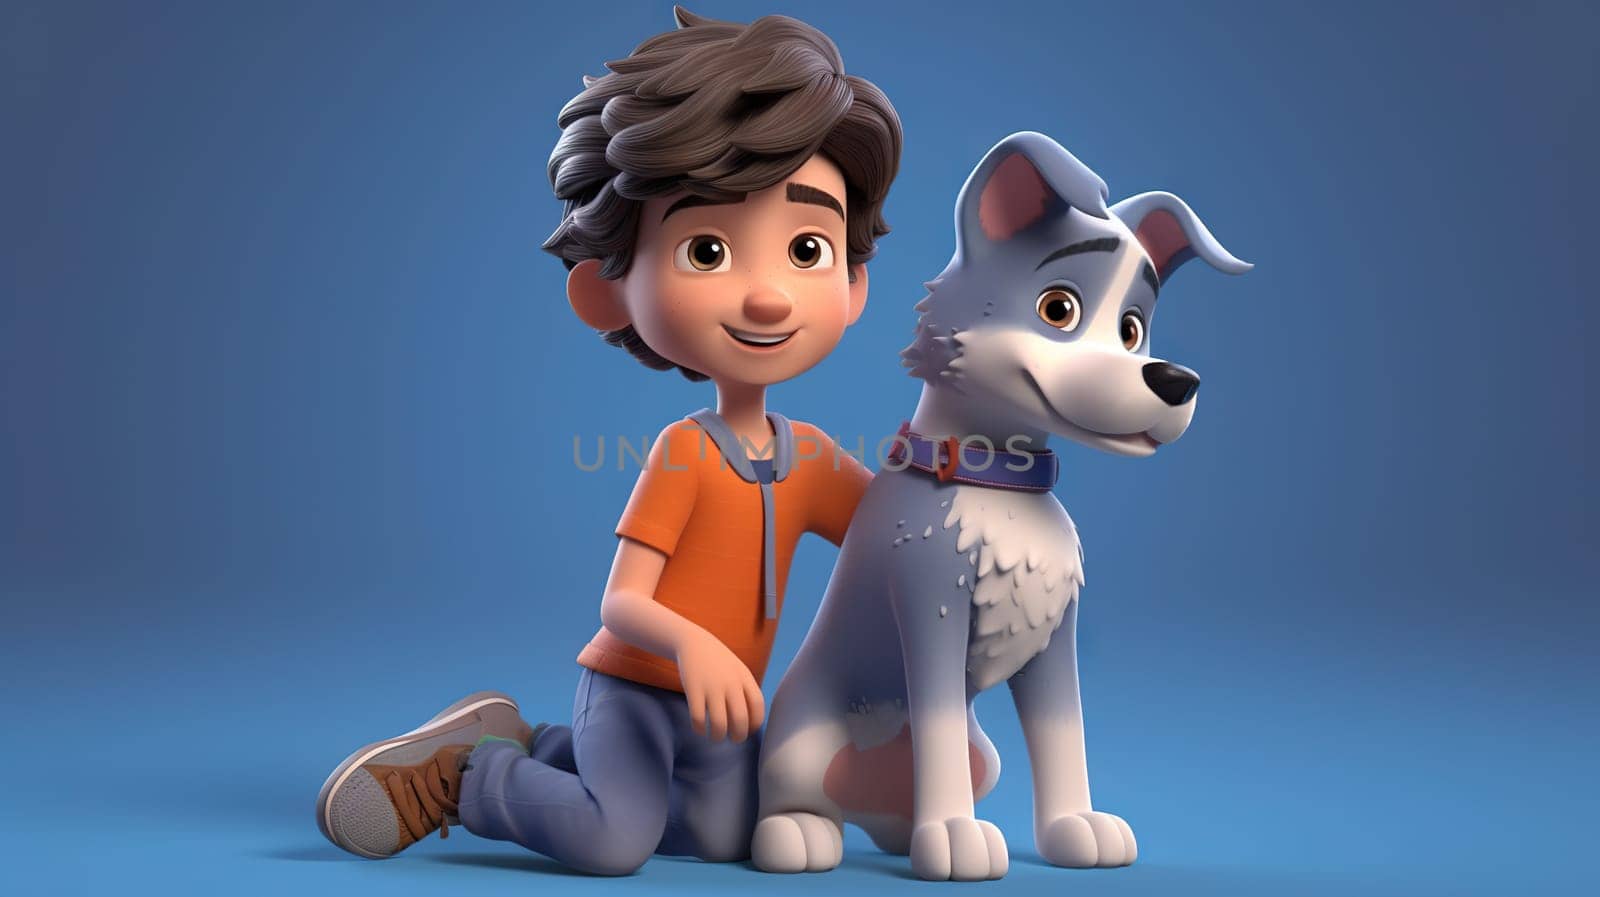 A cheerful cartoon illustration of a young boy with his animated dog friend - generative AI